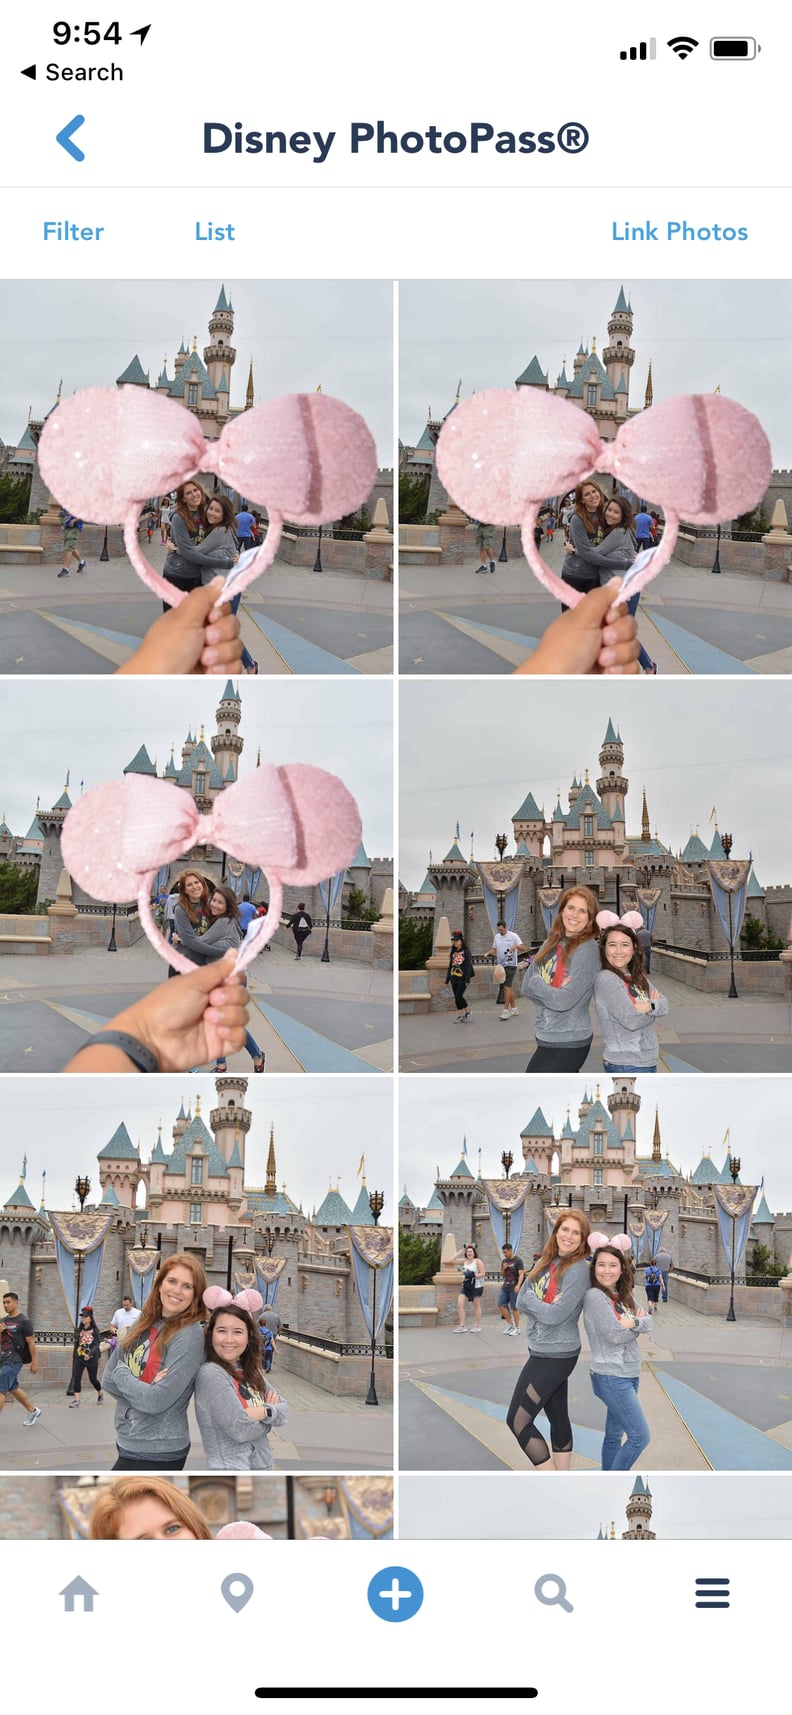 Your PhotoPass photos will be there for you to upload to your phone!